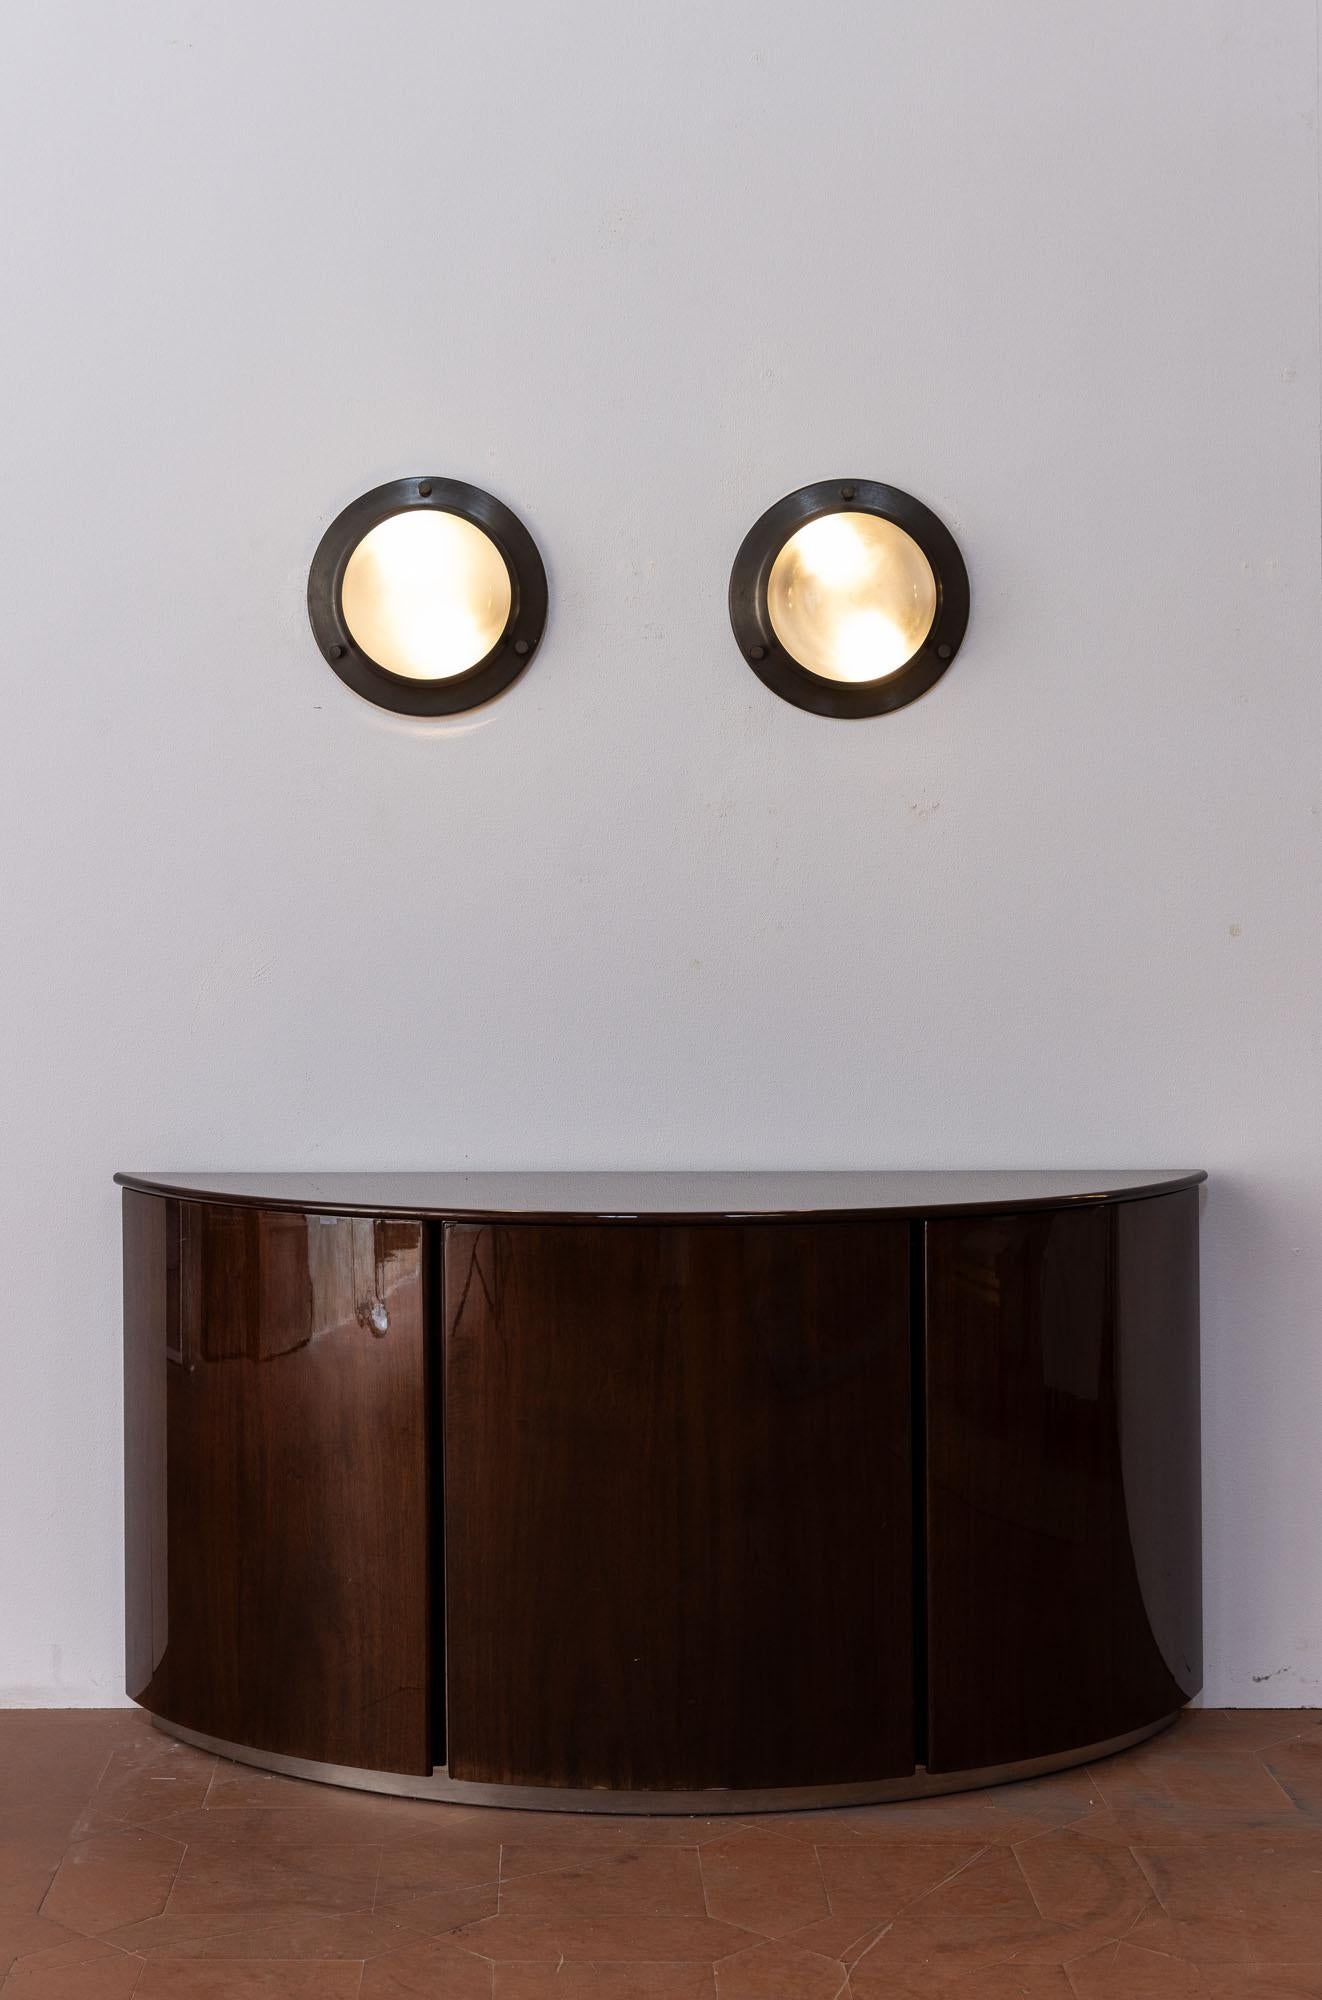 Midcentury Luigi Caccia Dominioni for Azucena Tommy 'LSP6' wall lights  For Sale 5